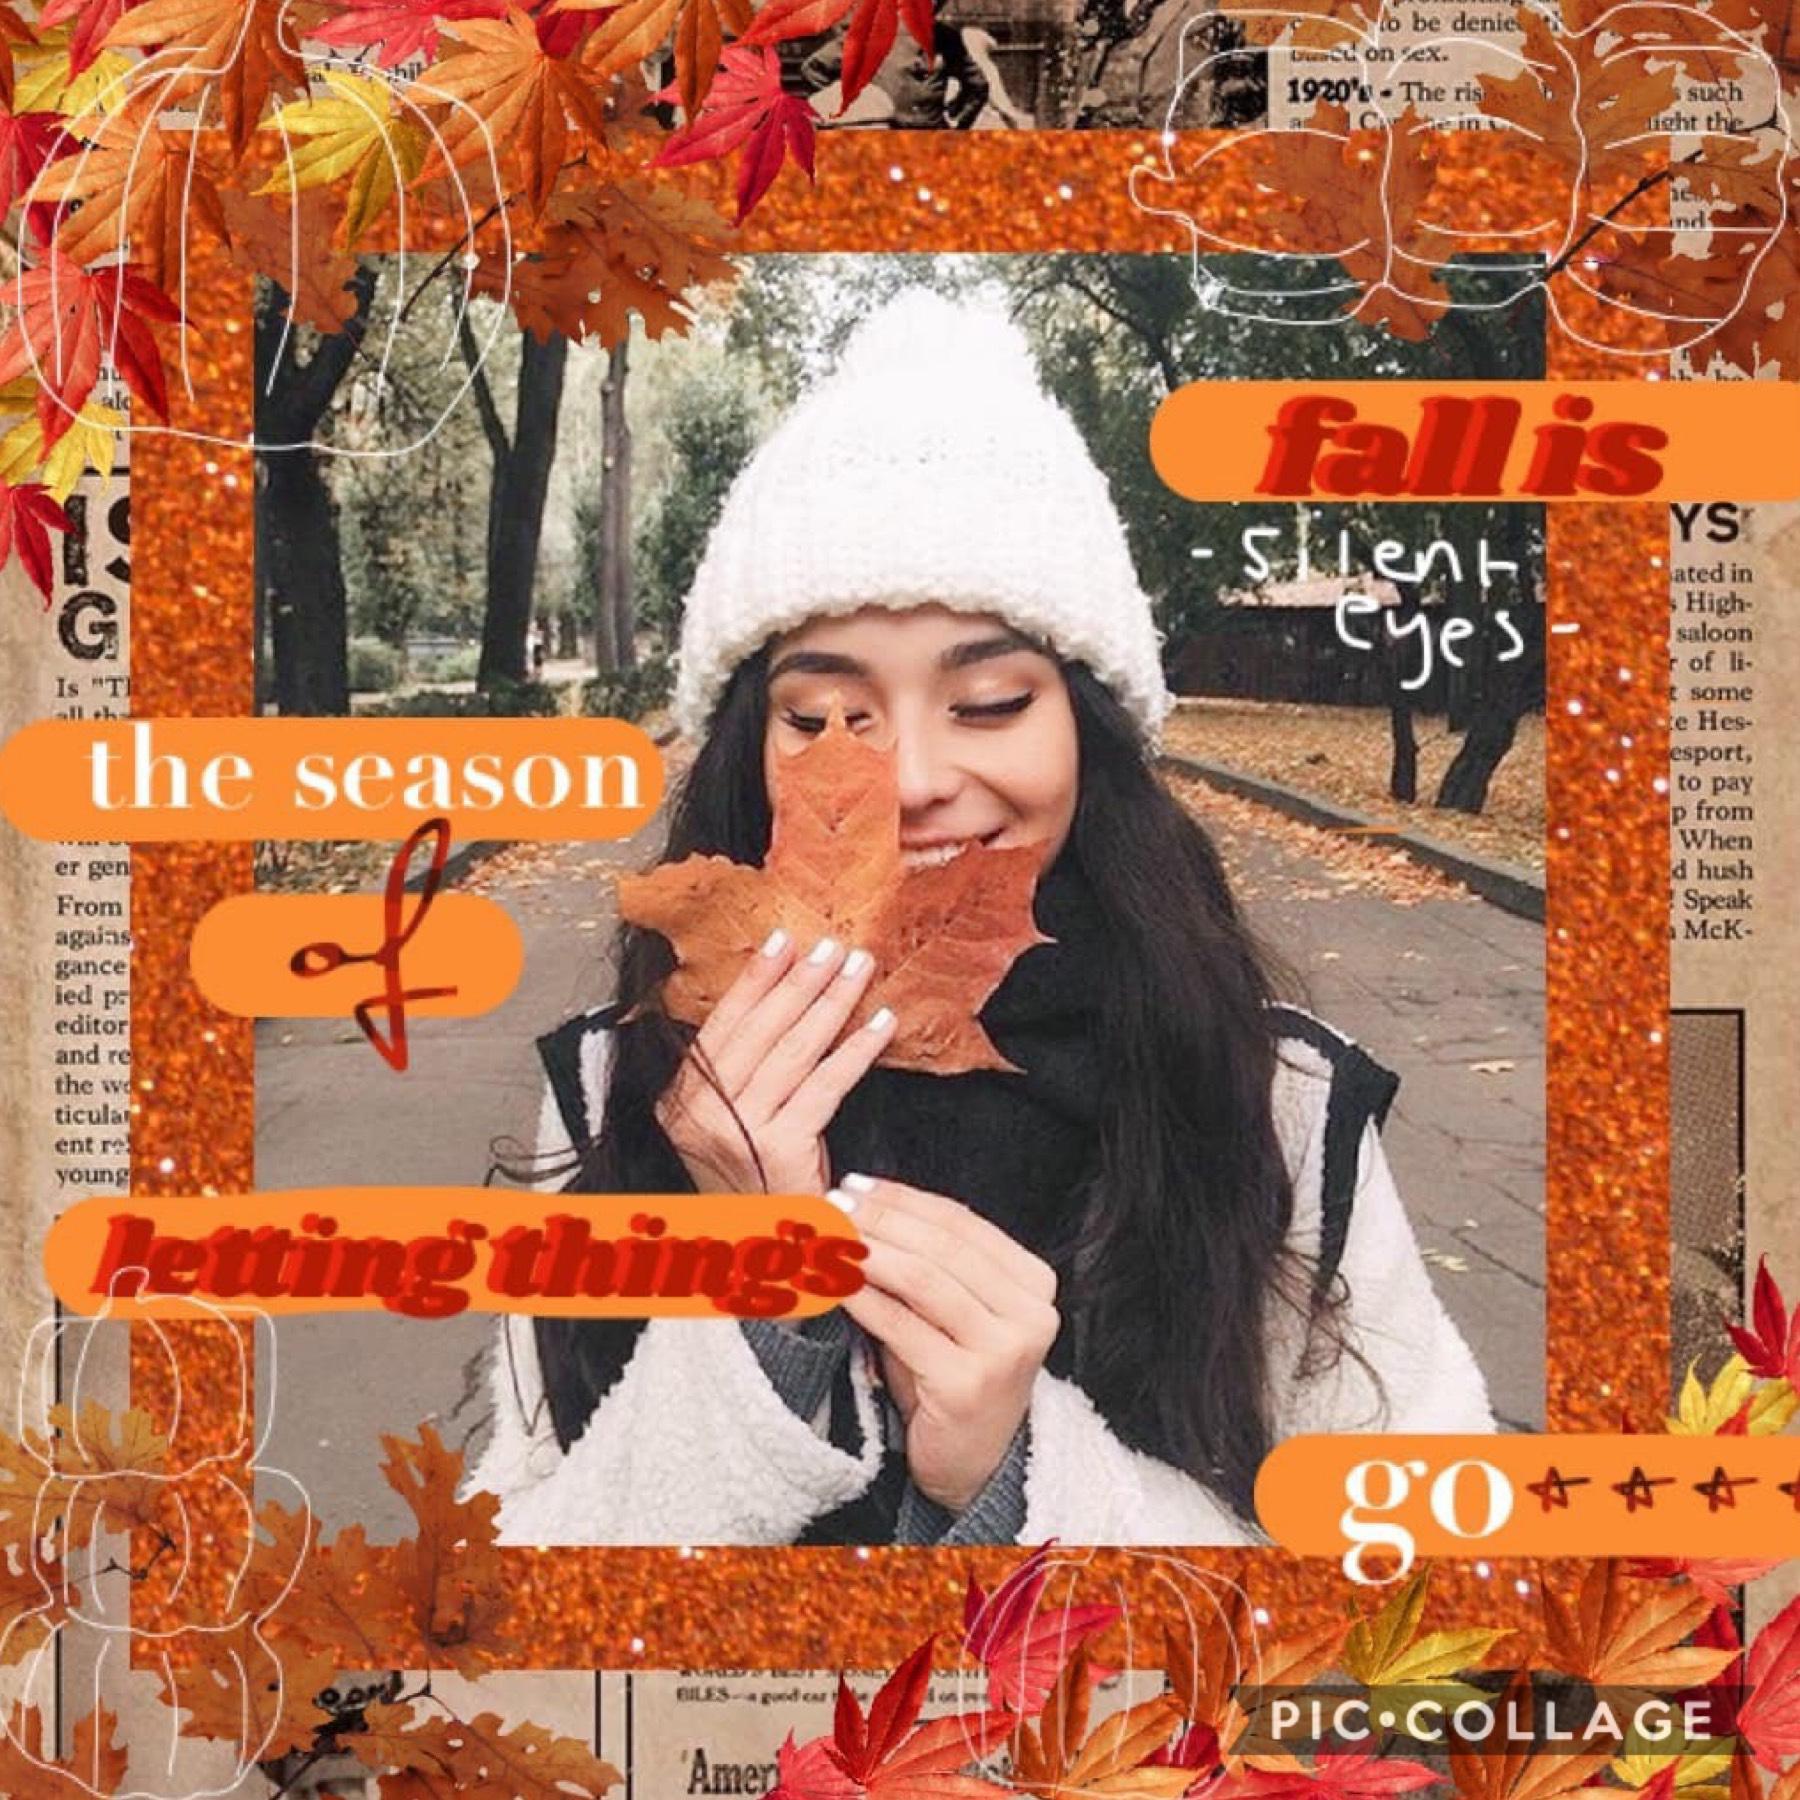 tap
hey everyone! what’s up? i was wondering if you guys wouldn’t mind liking this same edit that i entered for the pc fall contest. you guys can find it in my responses. 
Qotd: Favorite animal
aotd: Tiger